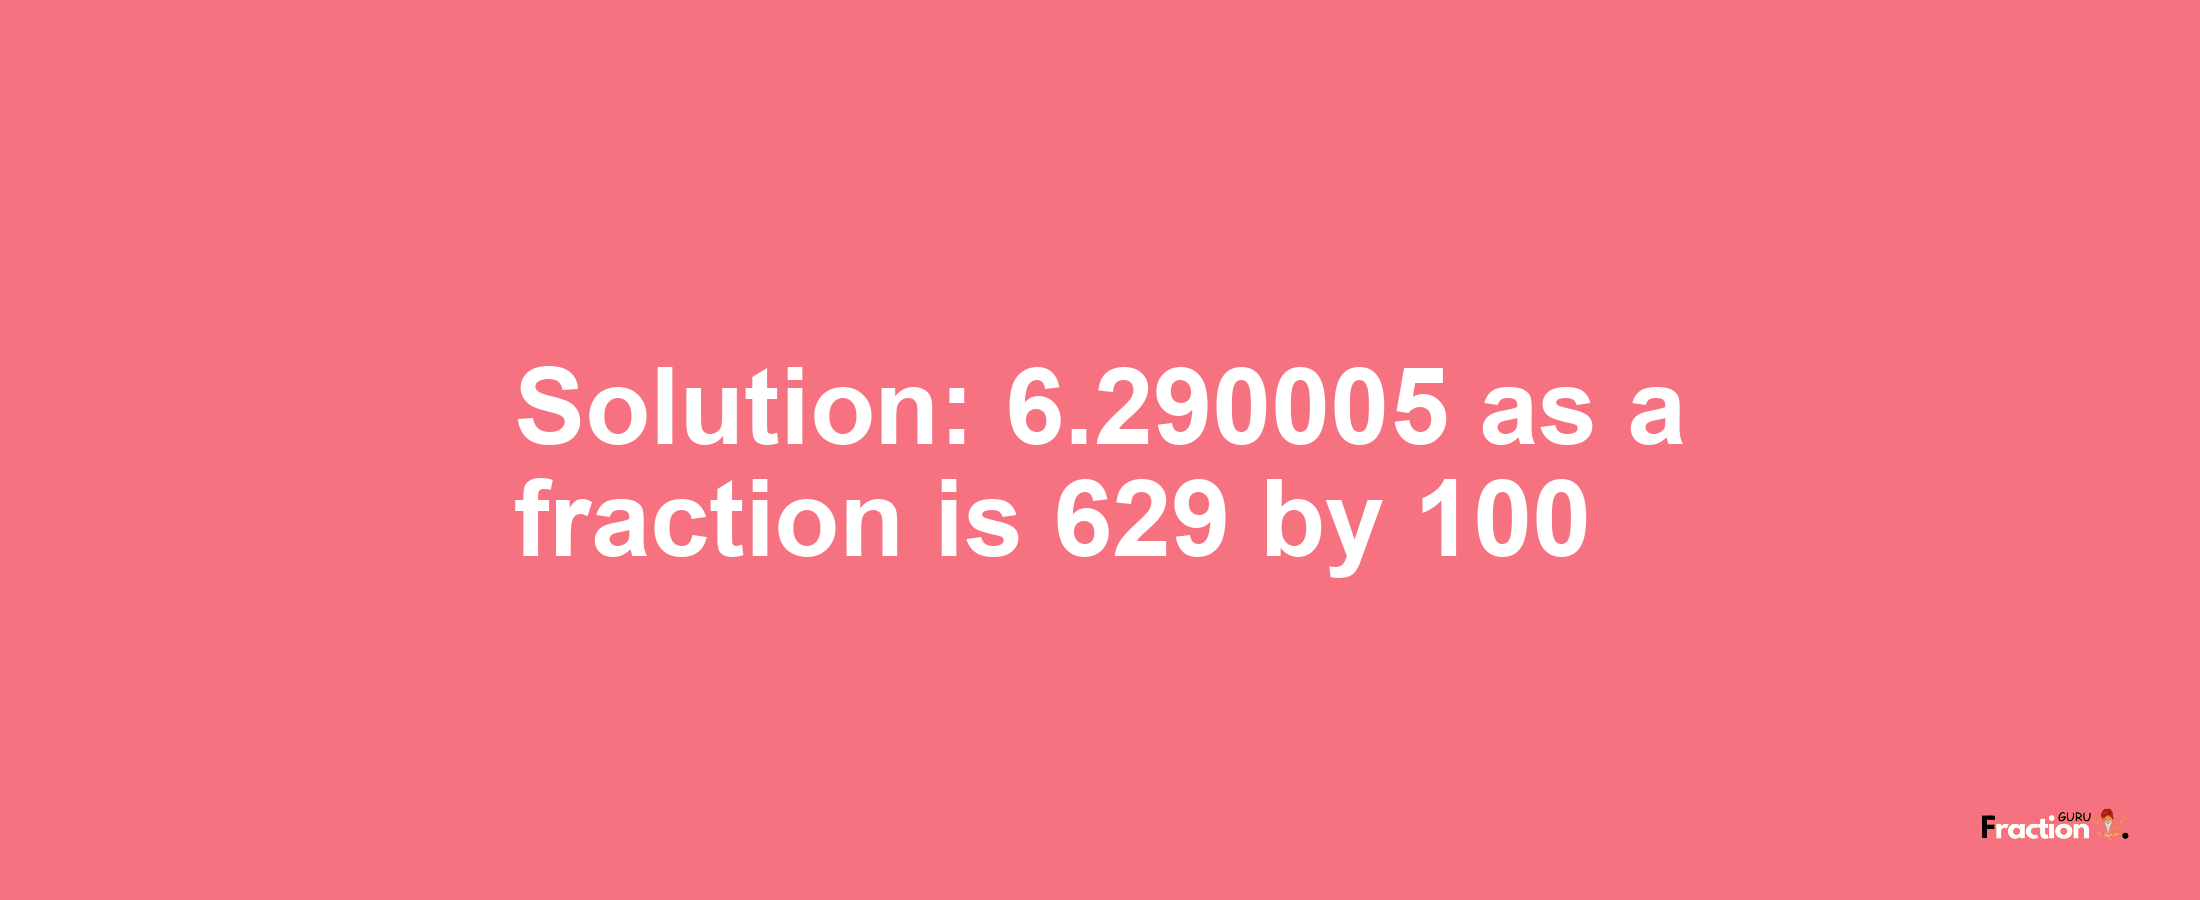 Solution:6.290005 as a fraction is 629/100